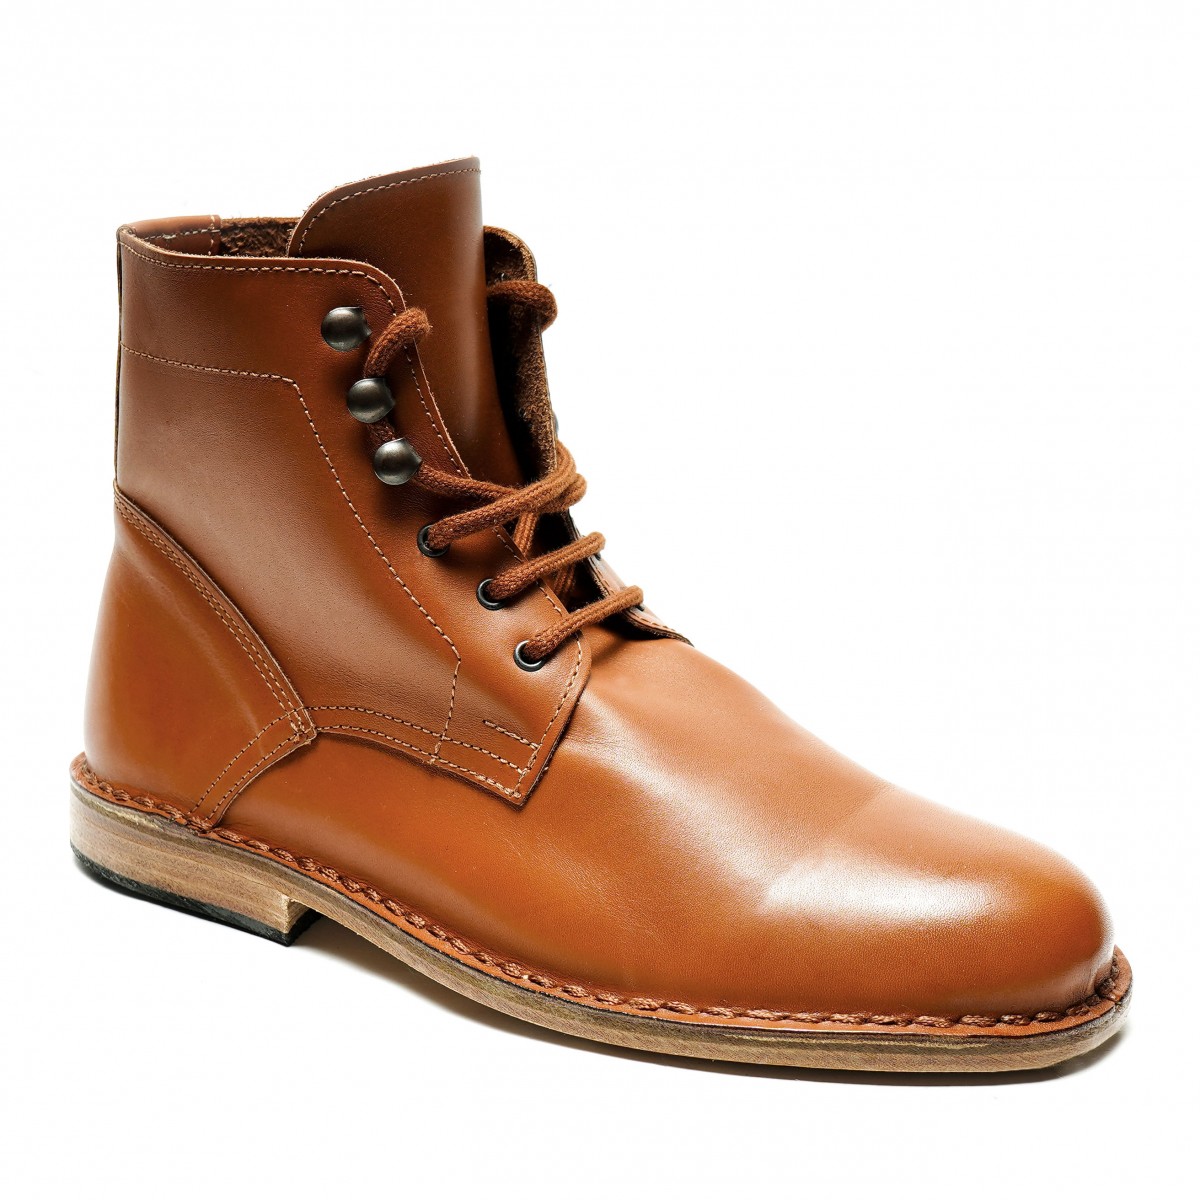 Mens Tan Leather Ankle Boots Handmade In Italy 